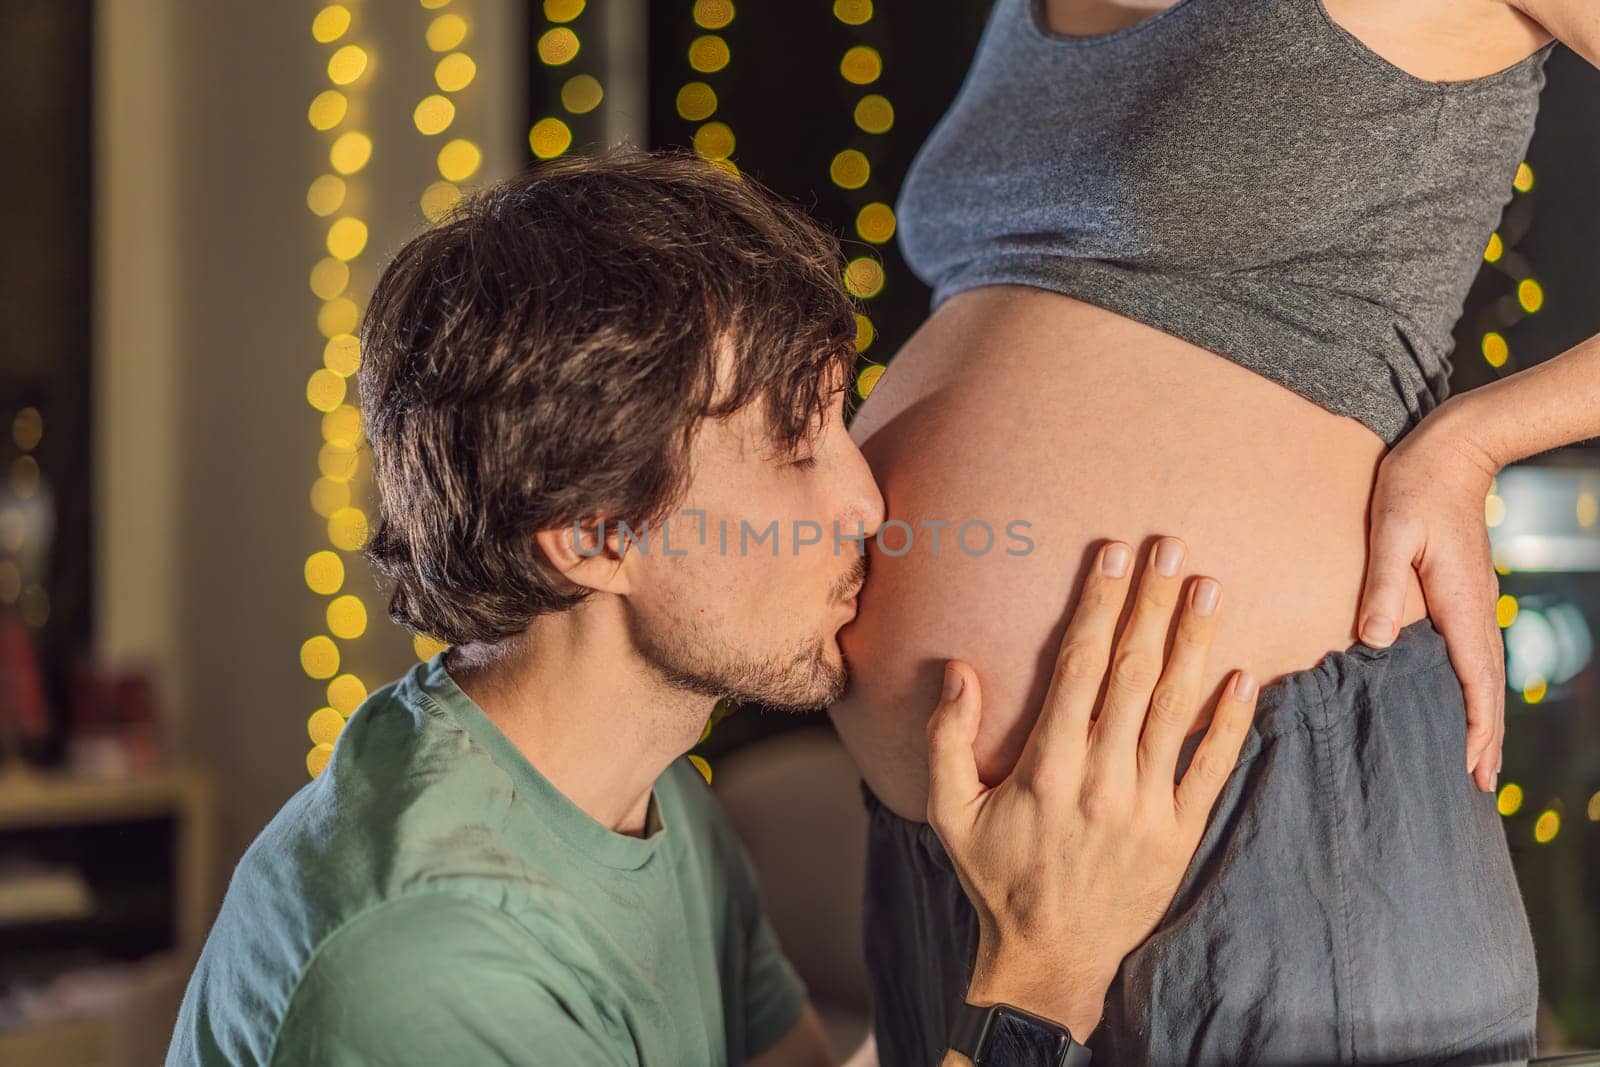 In a tender holiday moment, a husband kisses his wife's pregnant belly, expressing love and anticipation for the Christmas joy to come.